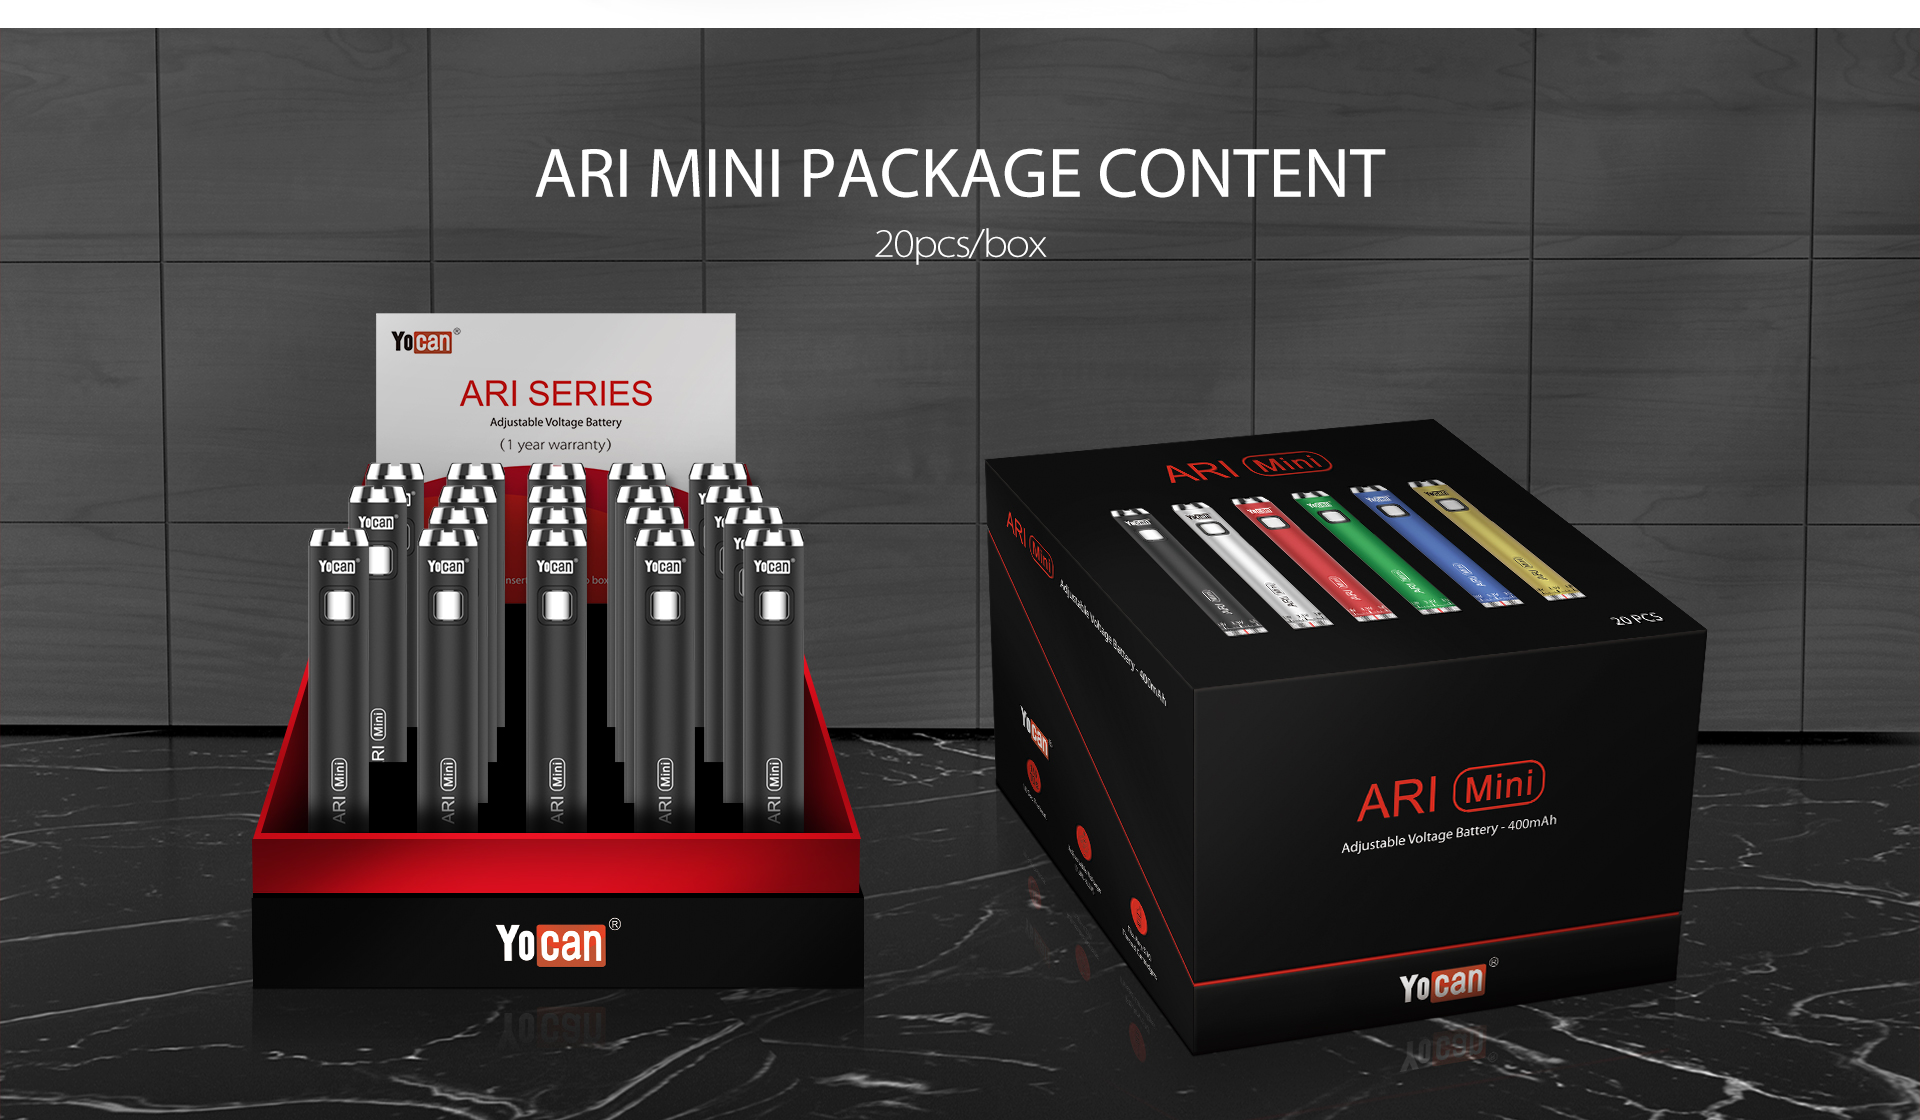 The Package Content of Yocan ARI Series Variable Voltage battery